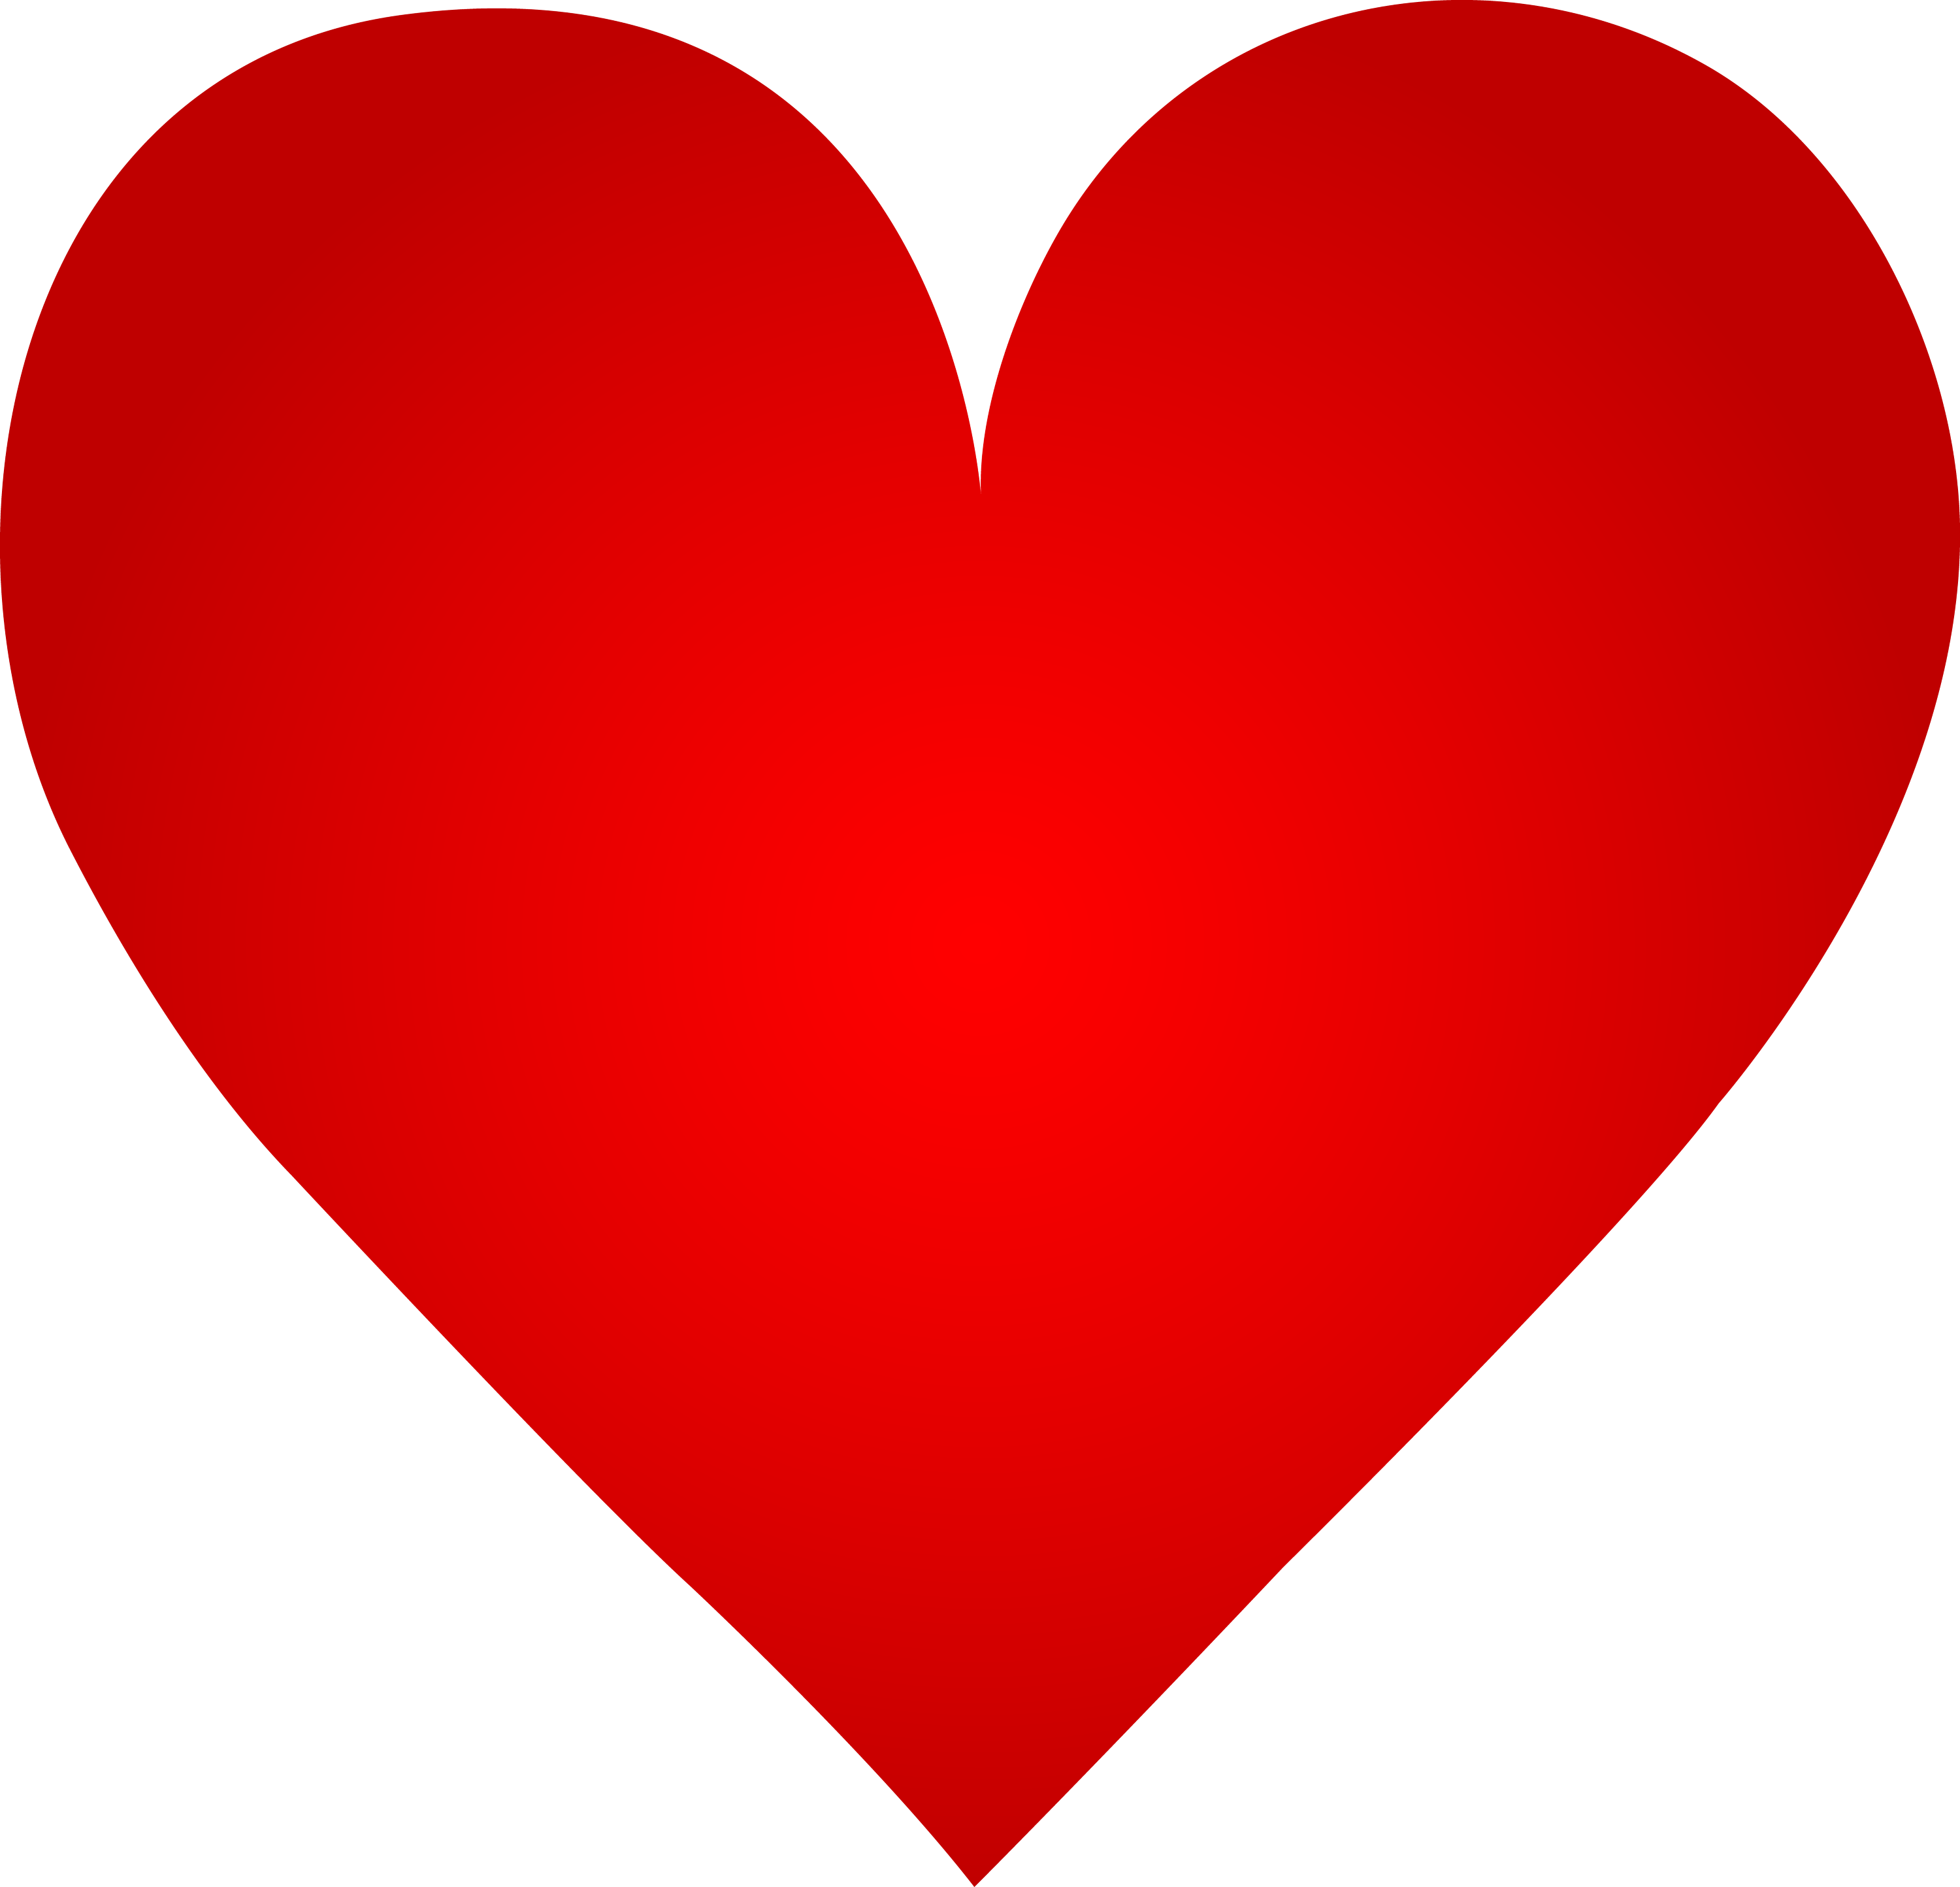 heart clipart free download - photo #29